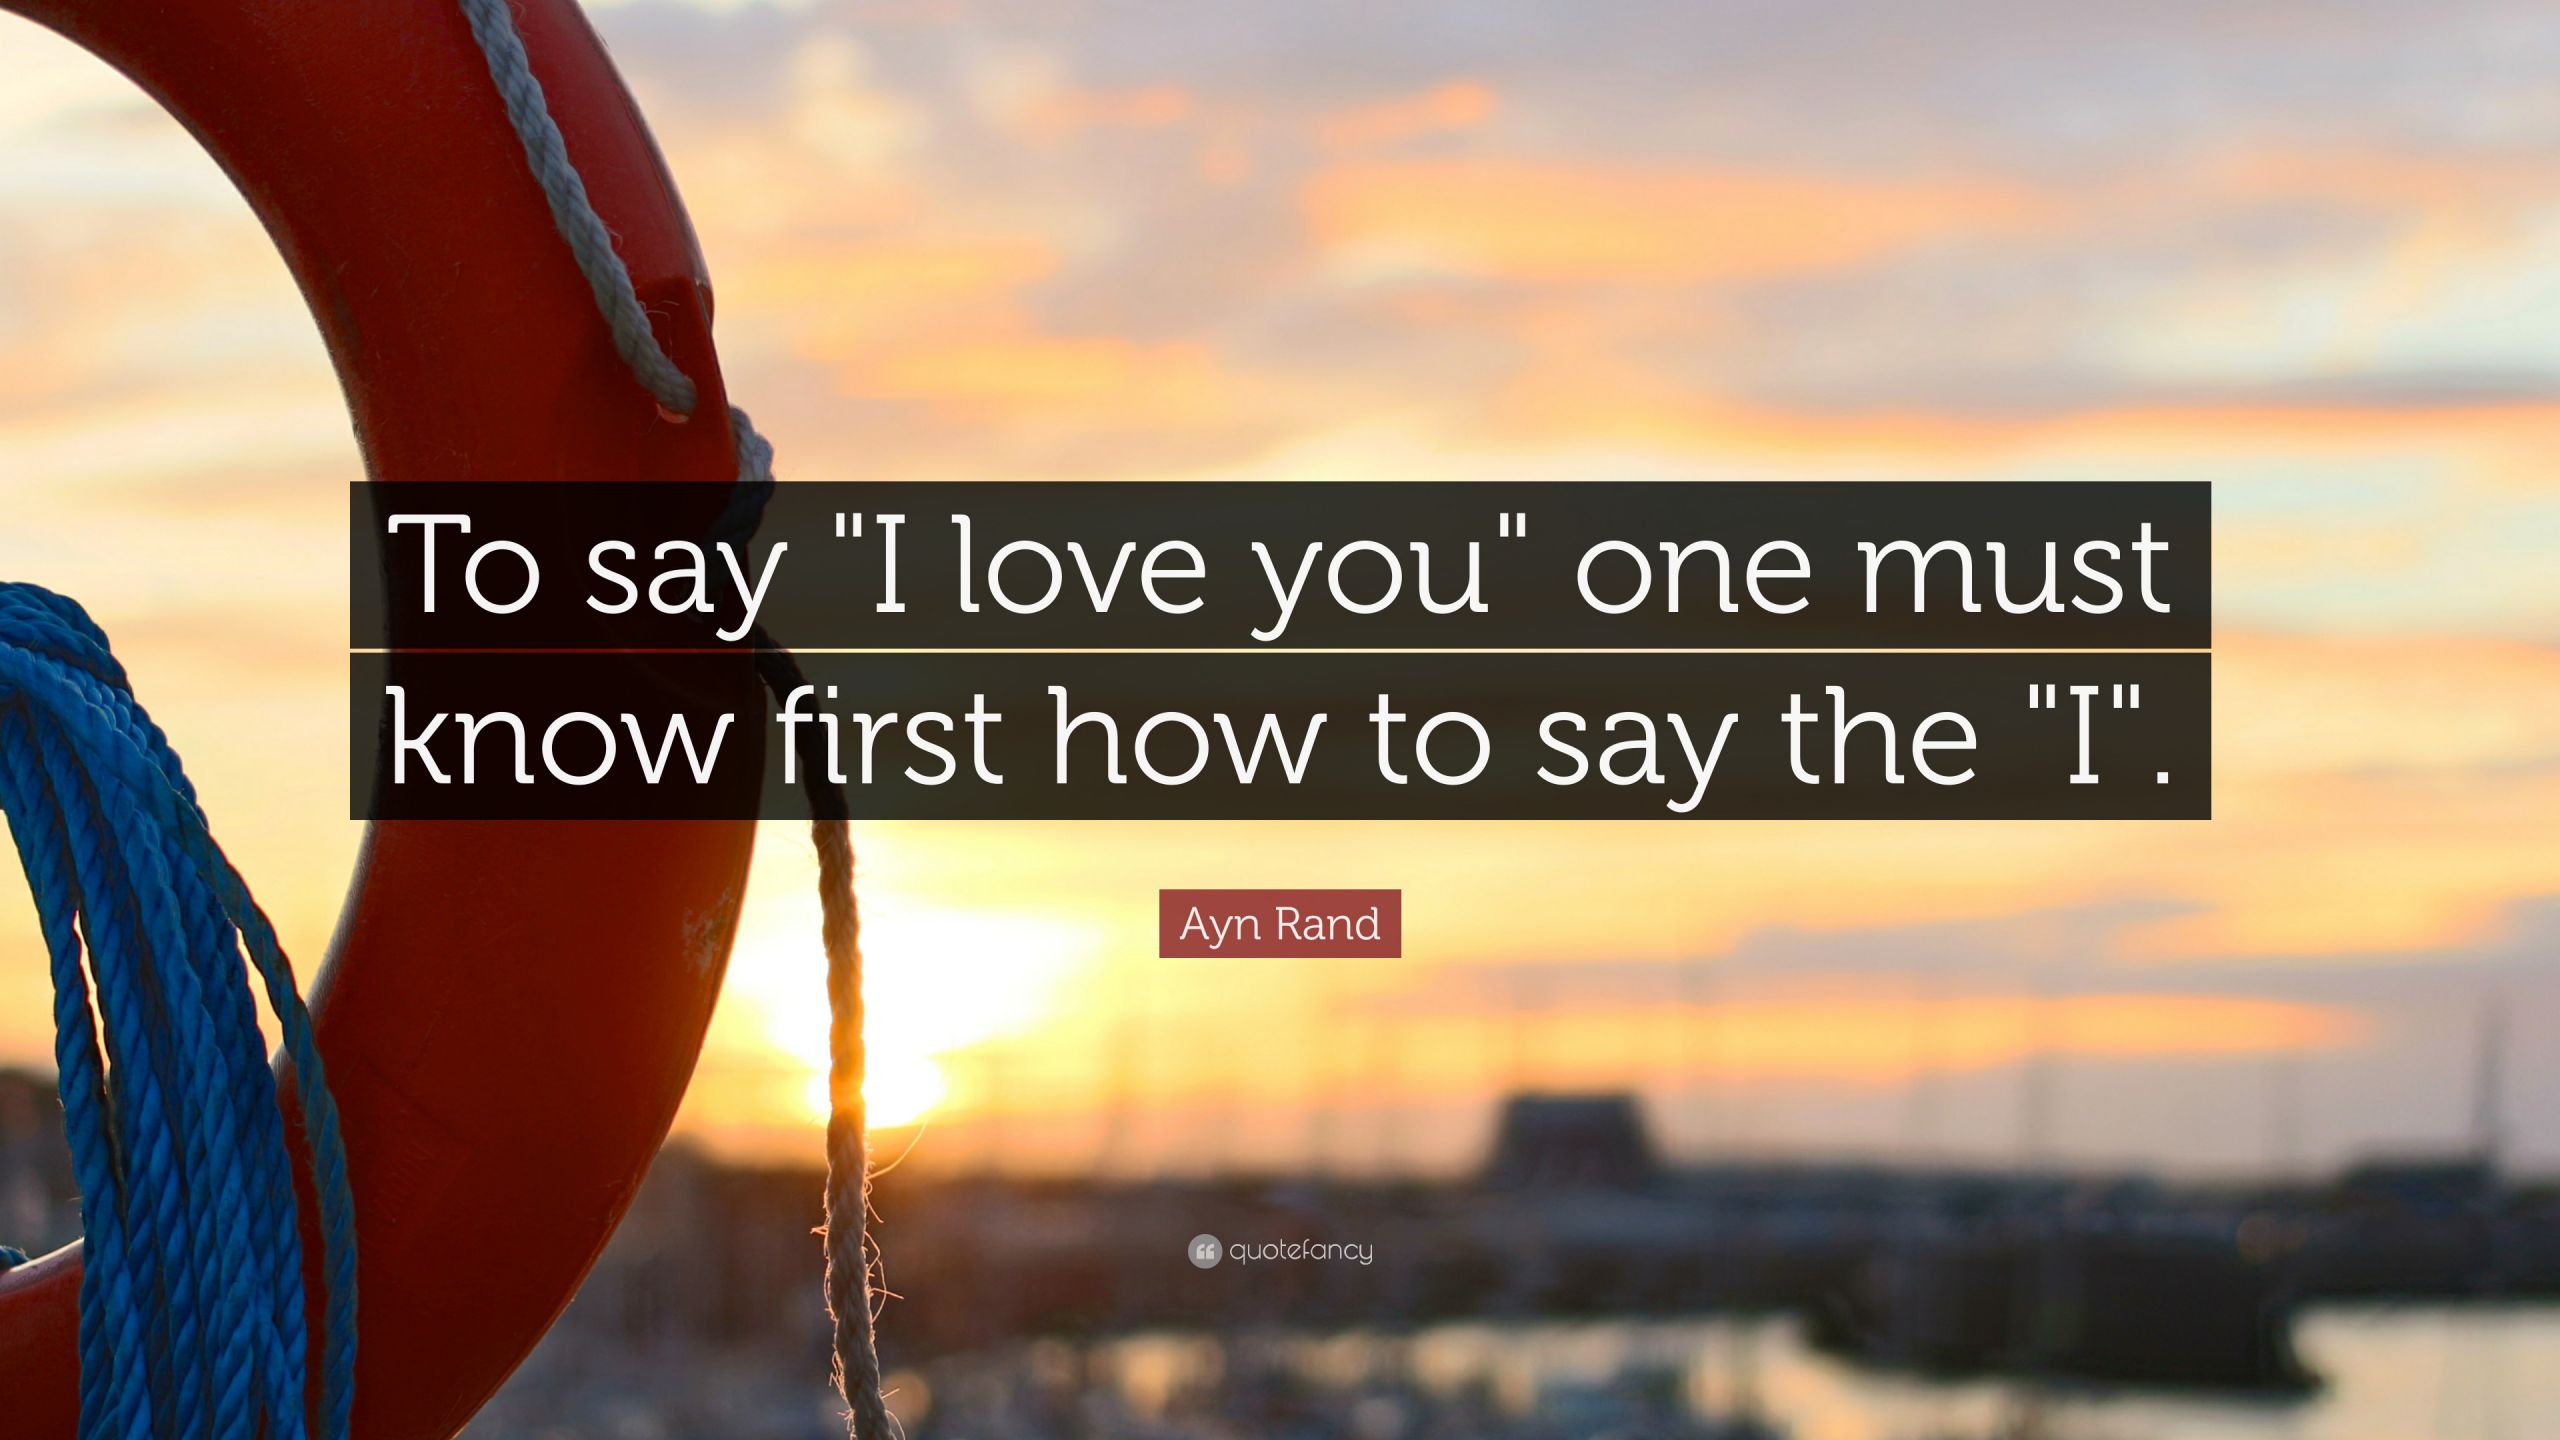 Ayn Rand Love Quotes
 Ayn Rand Quote “To say "I love you" one must know first